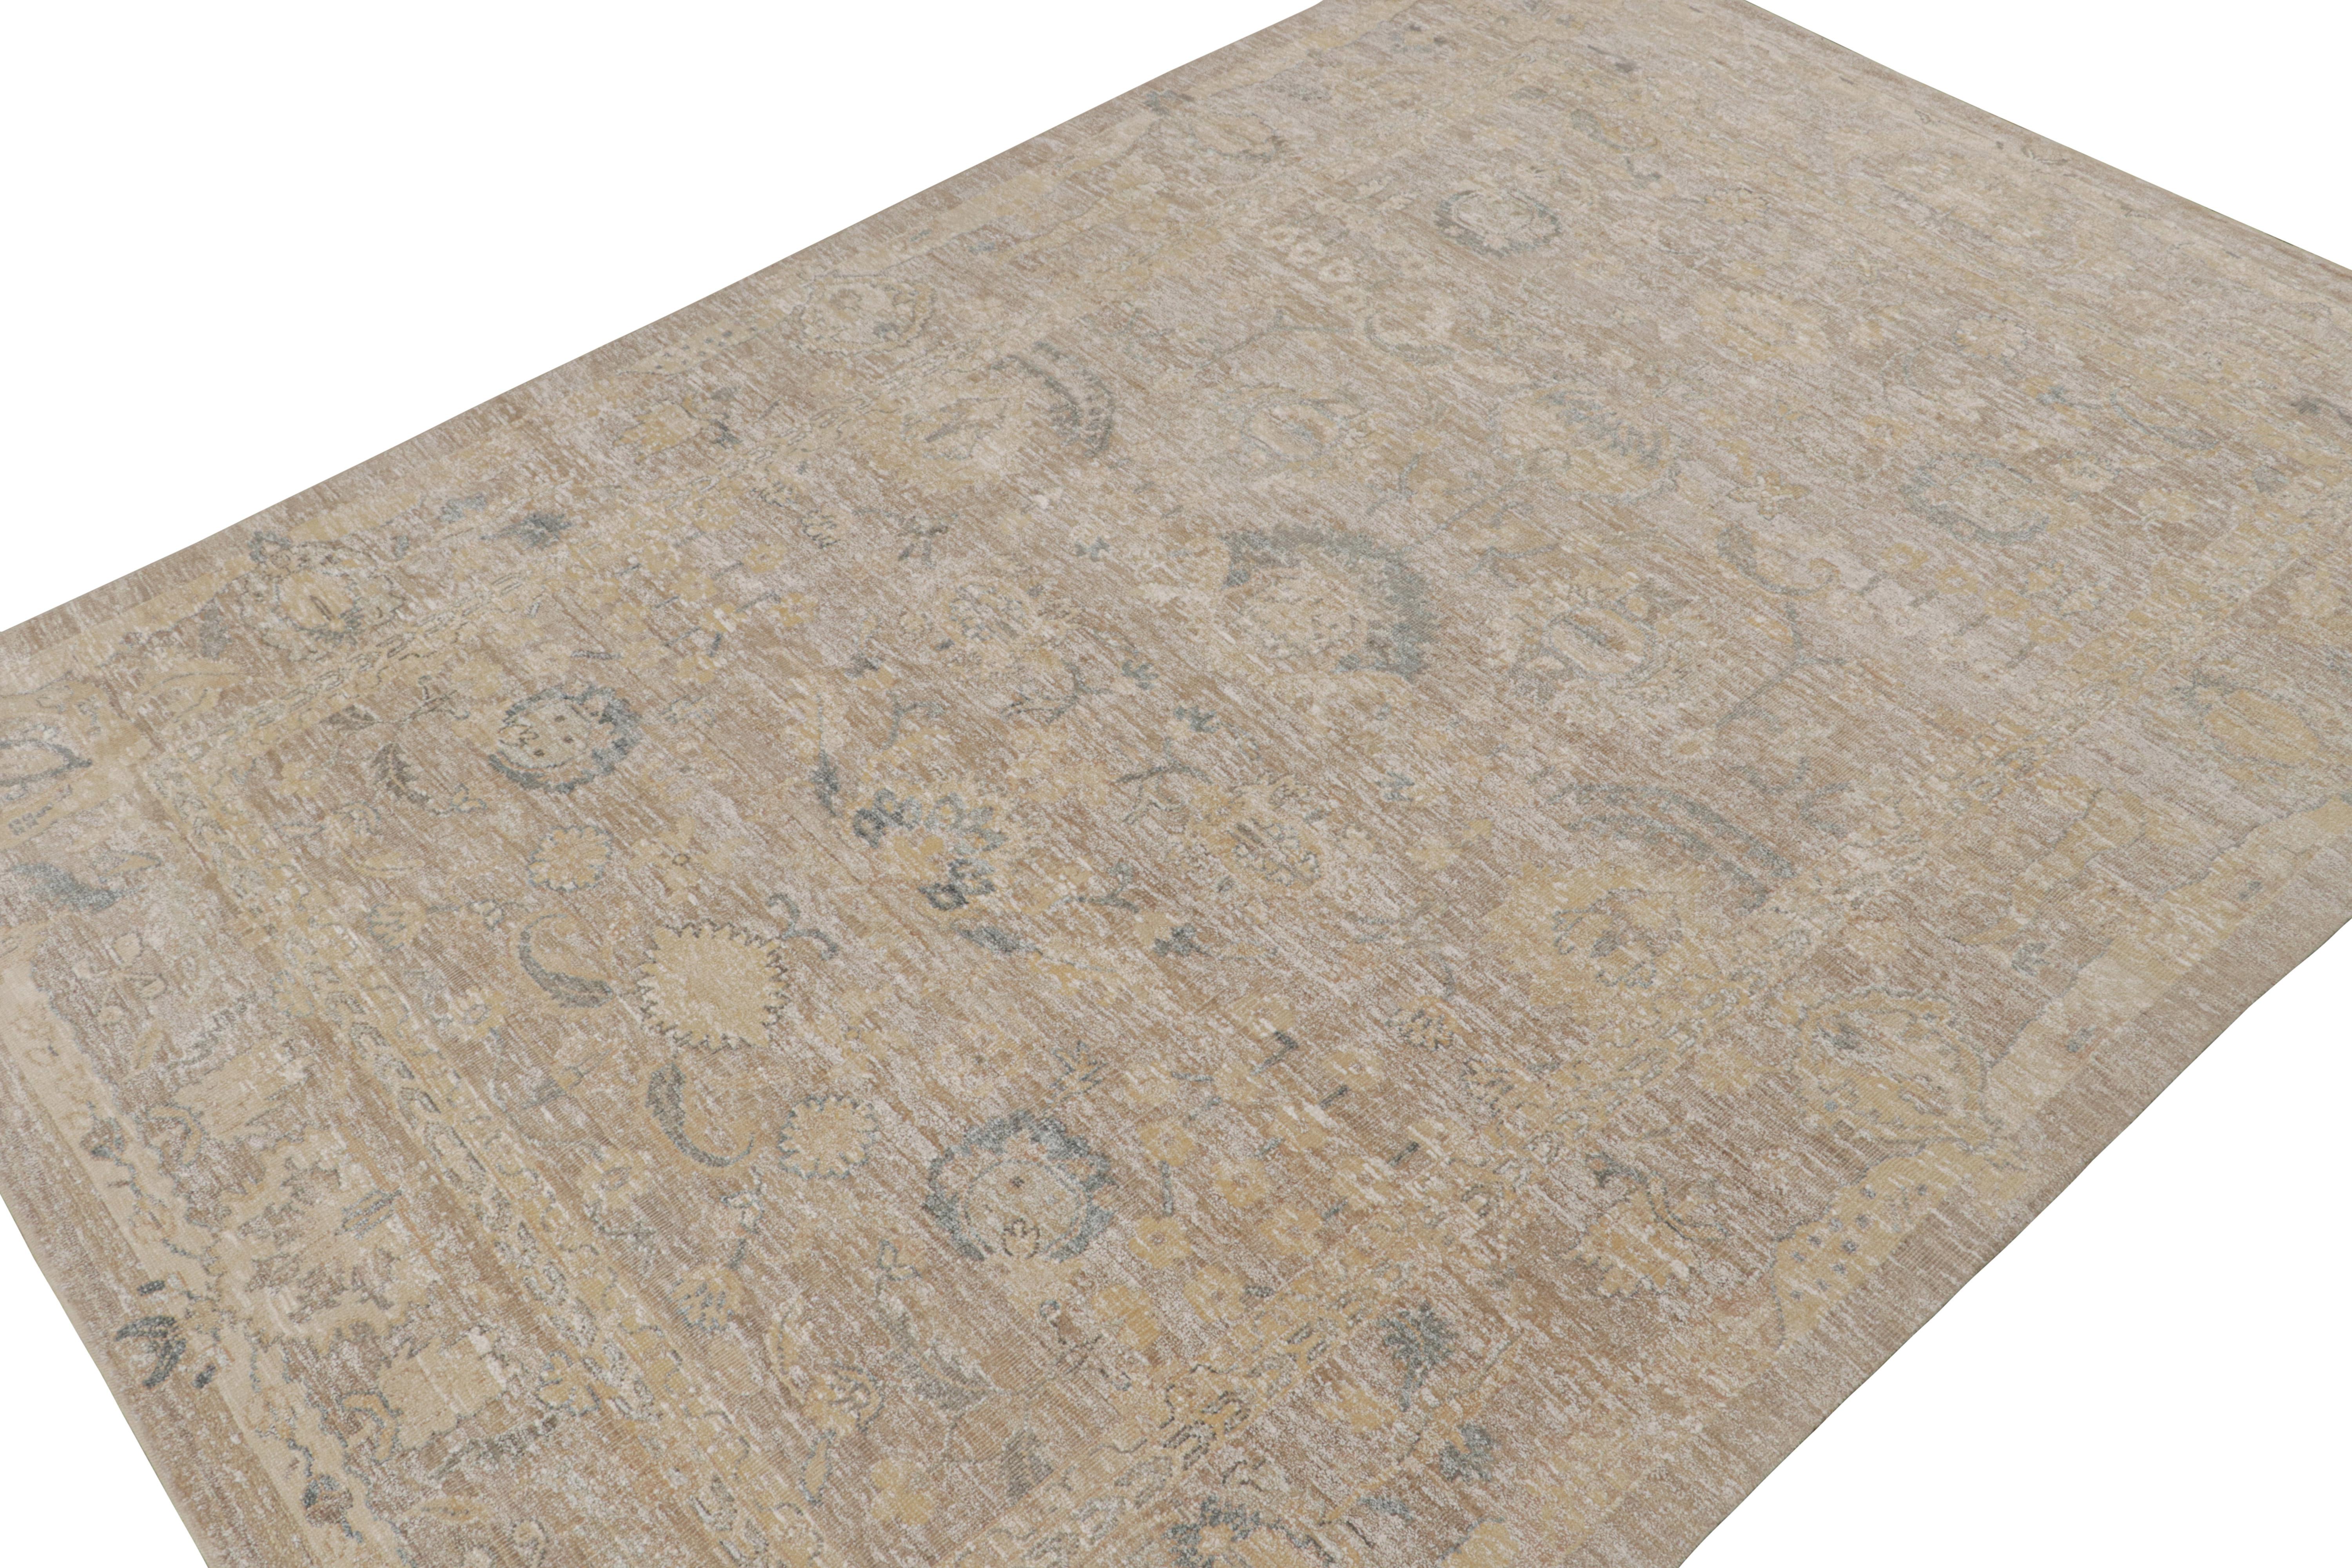 This 10x14 rug is inspired by antique Oushak rugs—from a bold new Modern Classics Collection by Rug & Kilim. Hand-knotted in silk, it enjoys taupe and beige-brown undertones with tribal motifs and floral patterns in blue and gold tones. 

On the